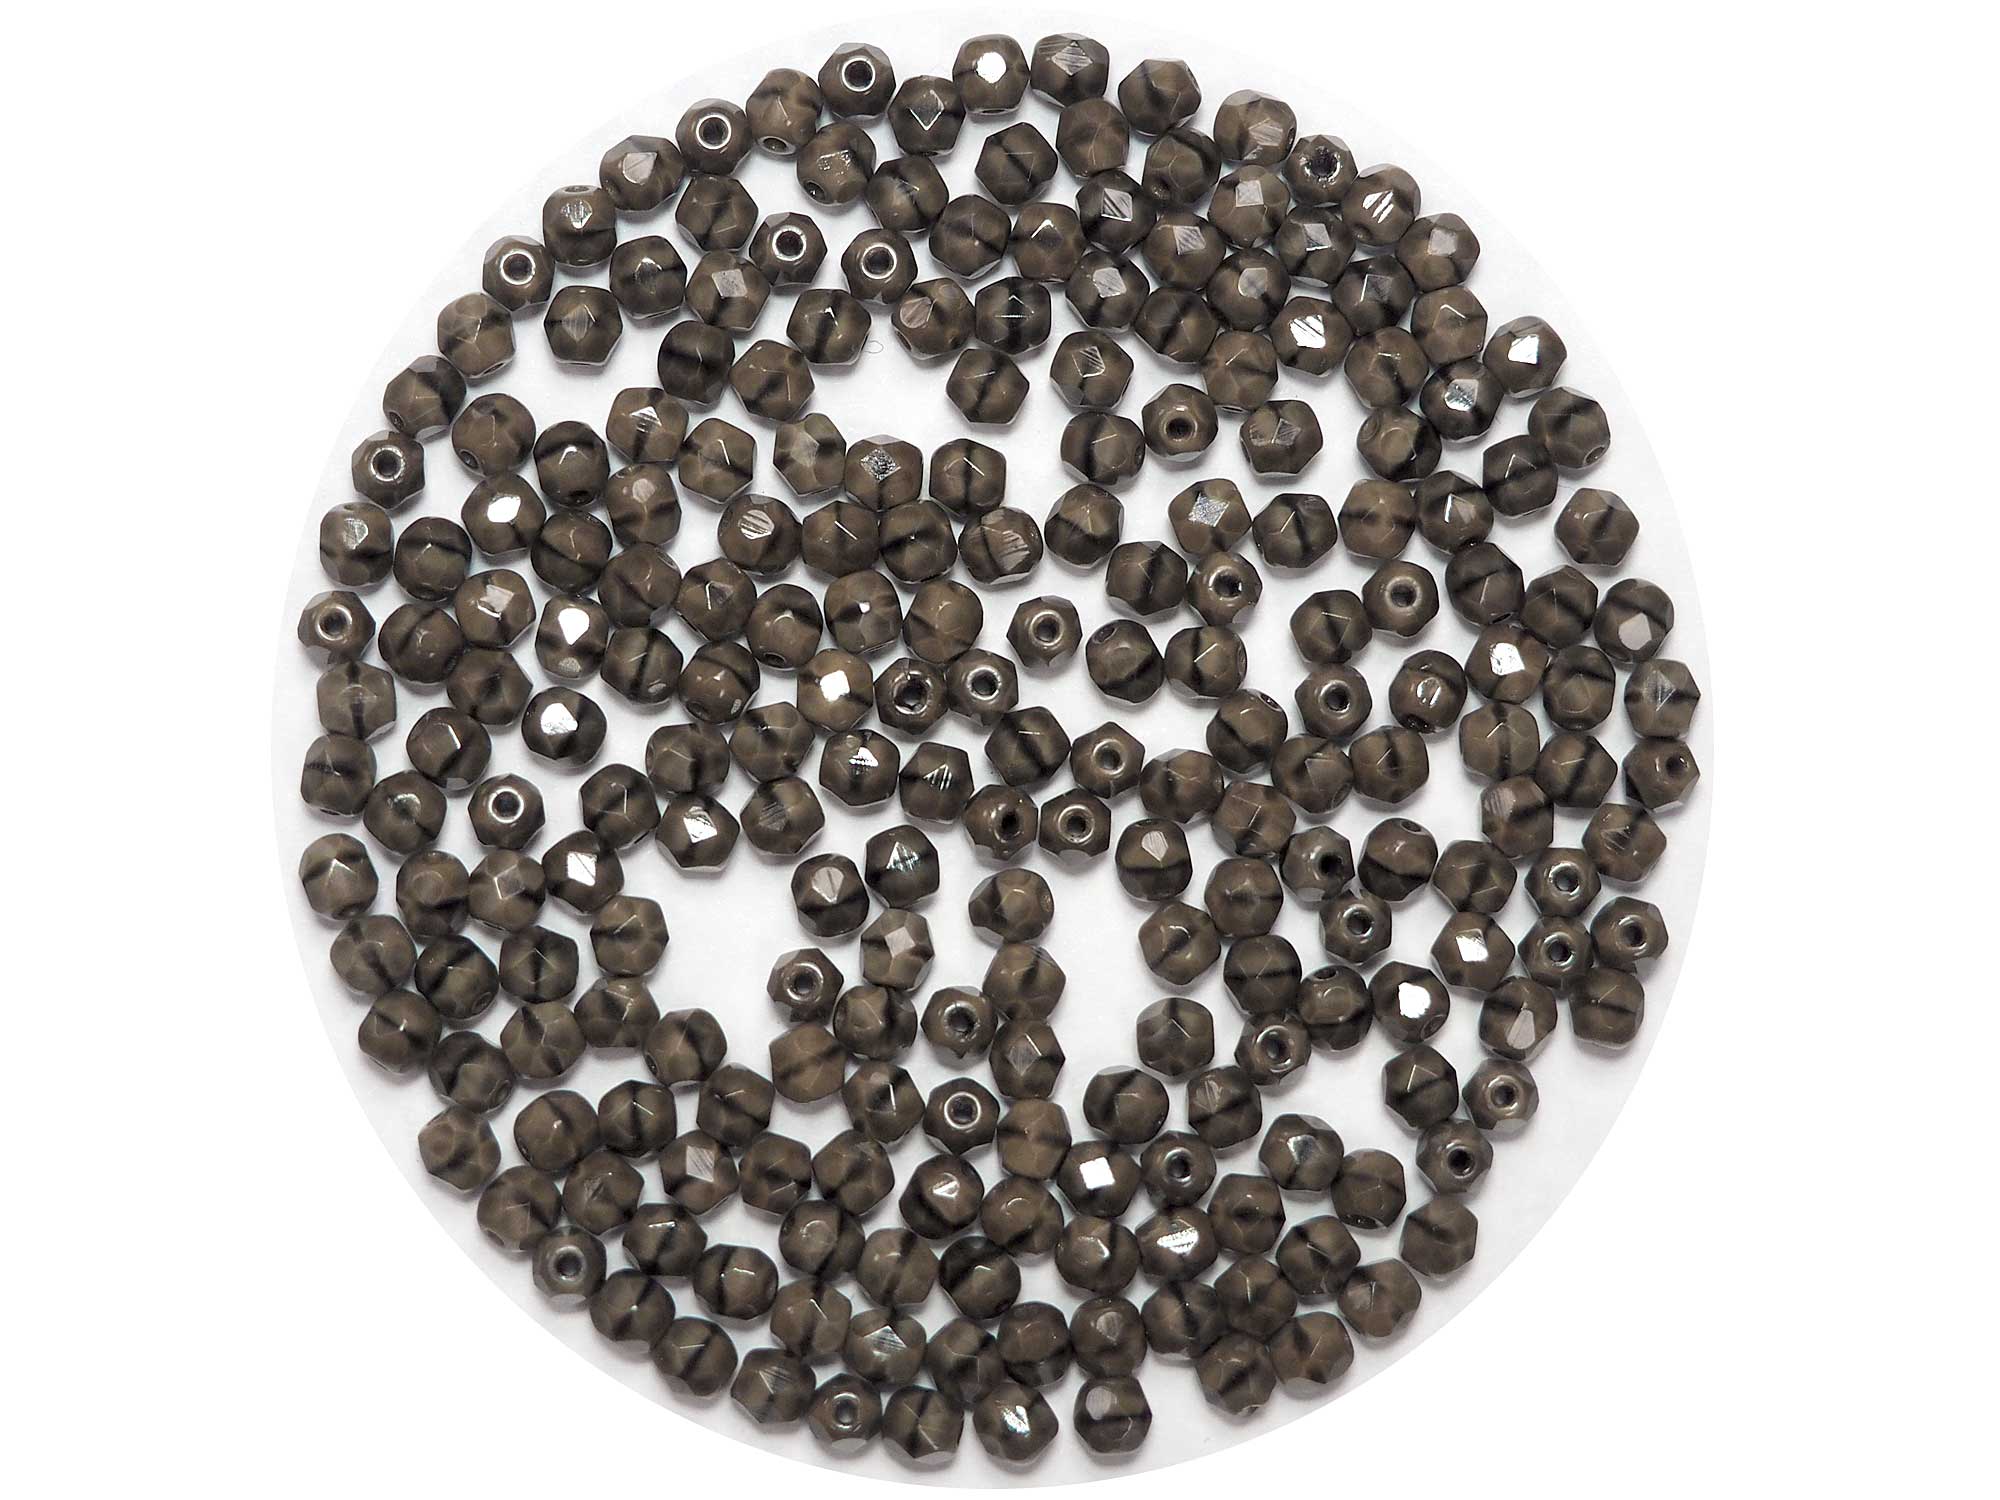 Brown Marmor, Czech Fire Polished Round Faceted Glass Beads, 4mm 100pcs, P455